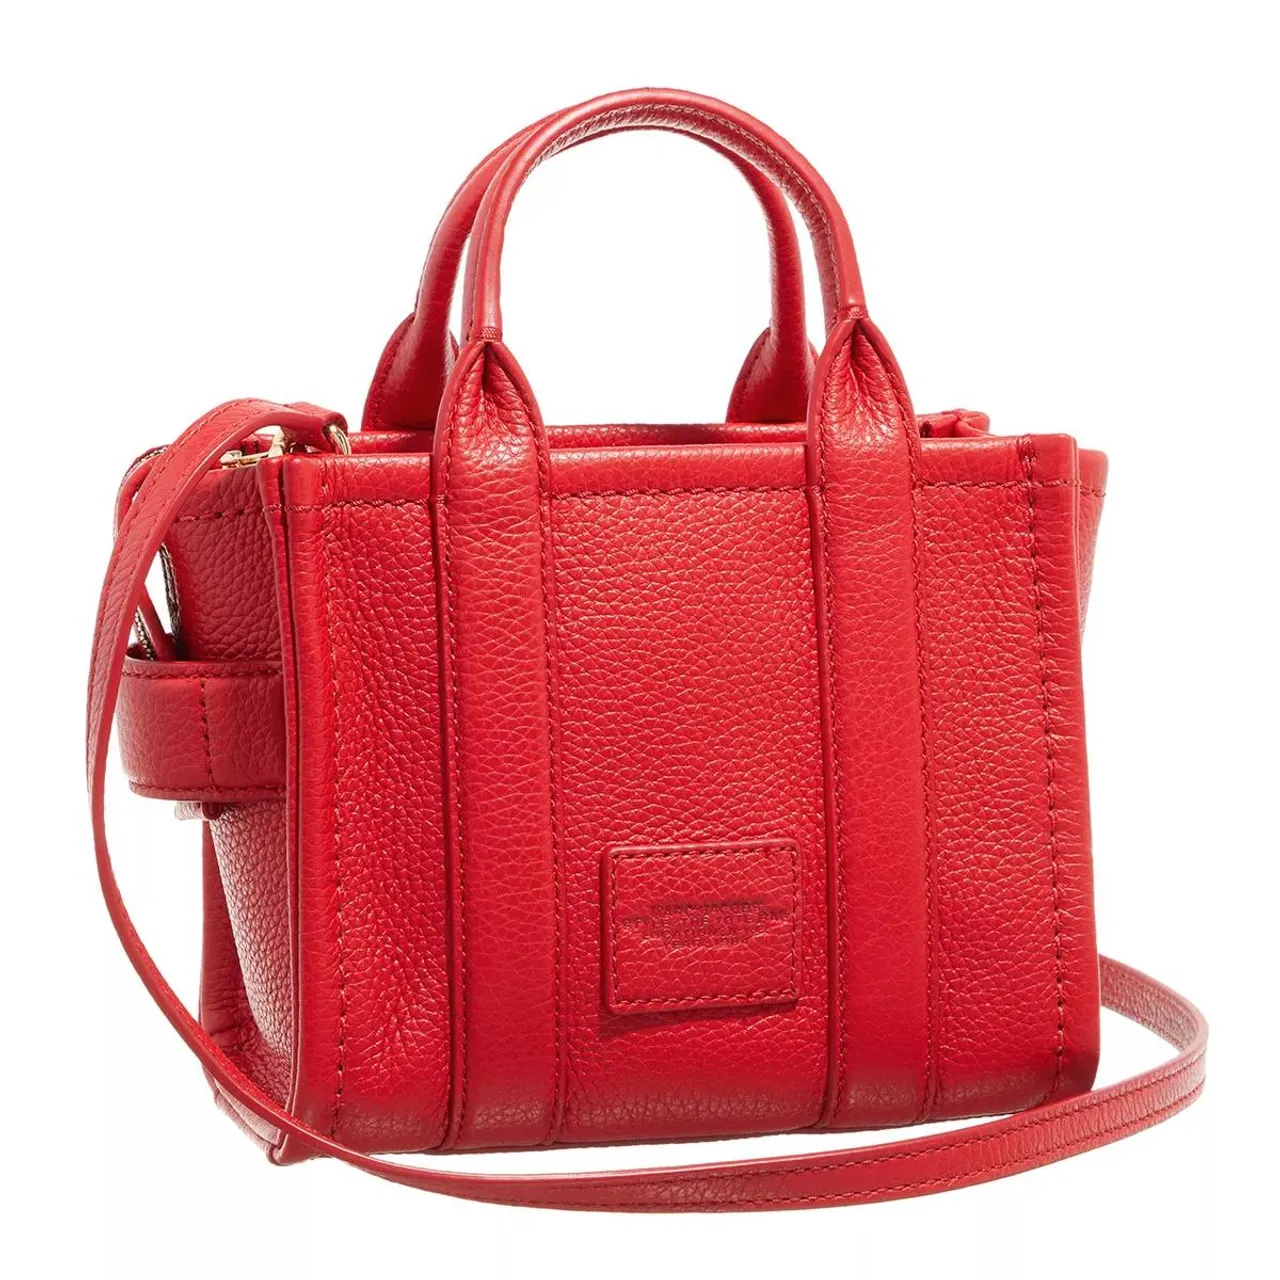 Marc Jacobs Tote Bags - The Micro Tote - red - Tote Bags for ladies